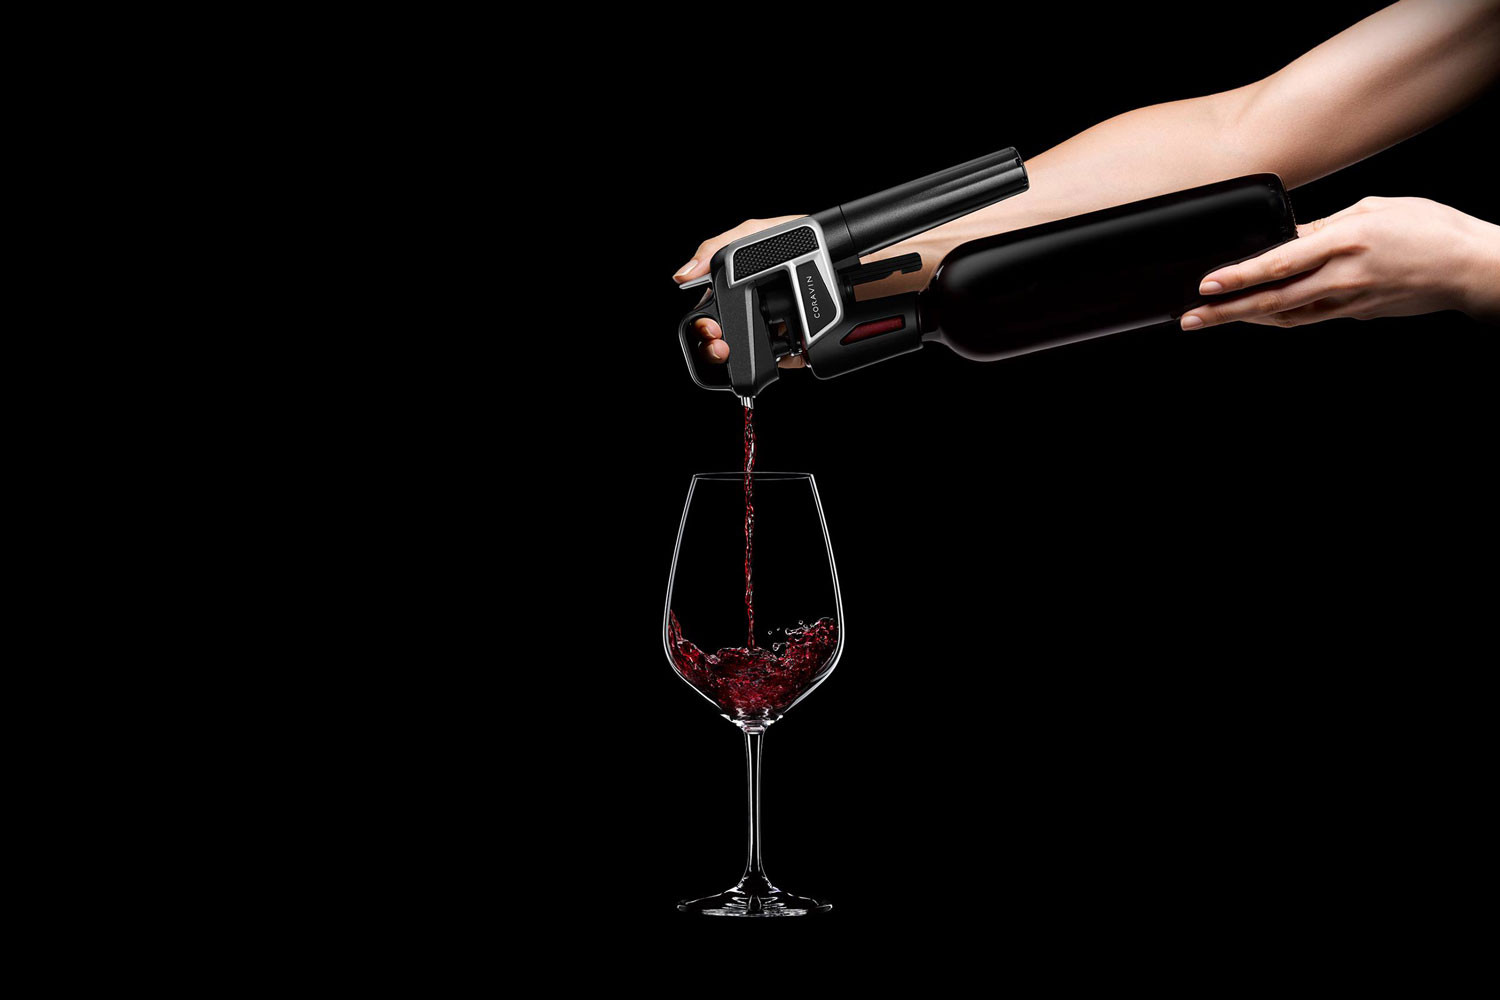 coravin-model-two-wine-opener-and-pouring-1500x1000